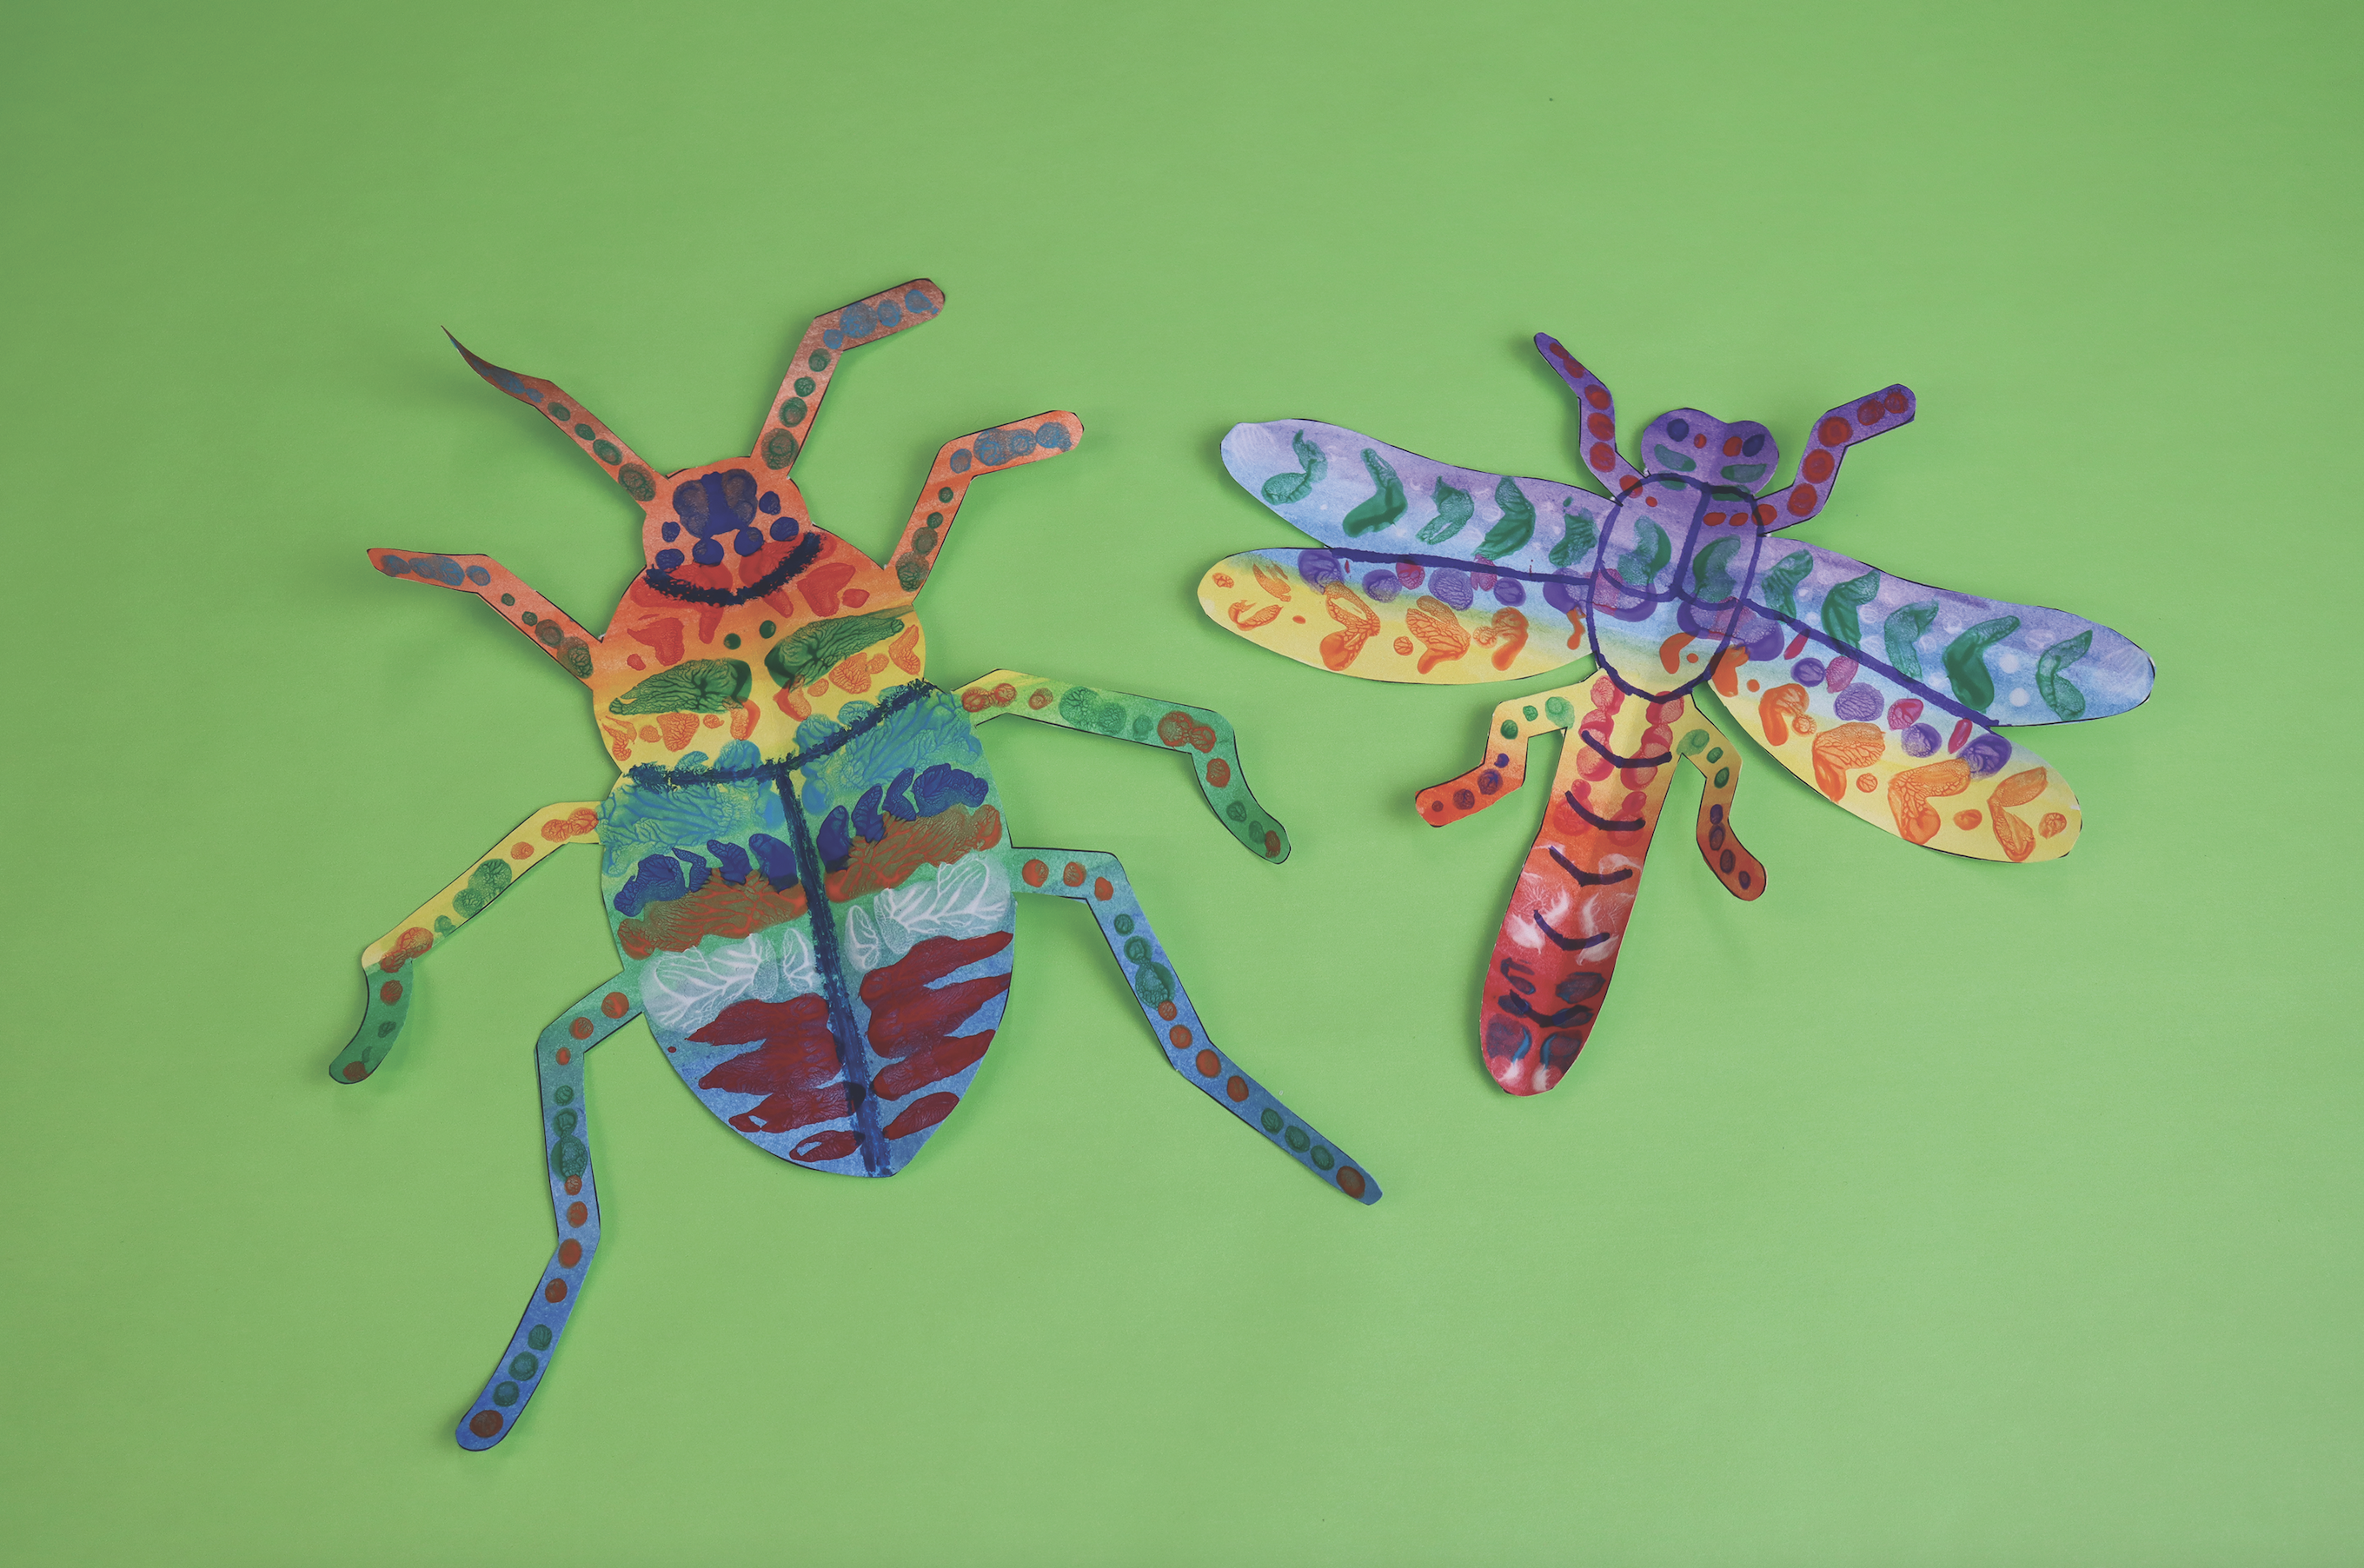 Insects art project from Prang